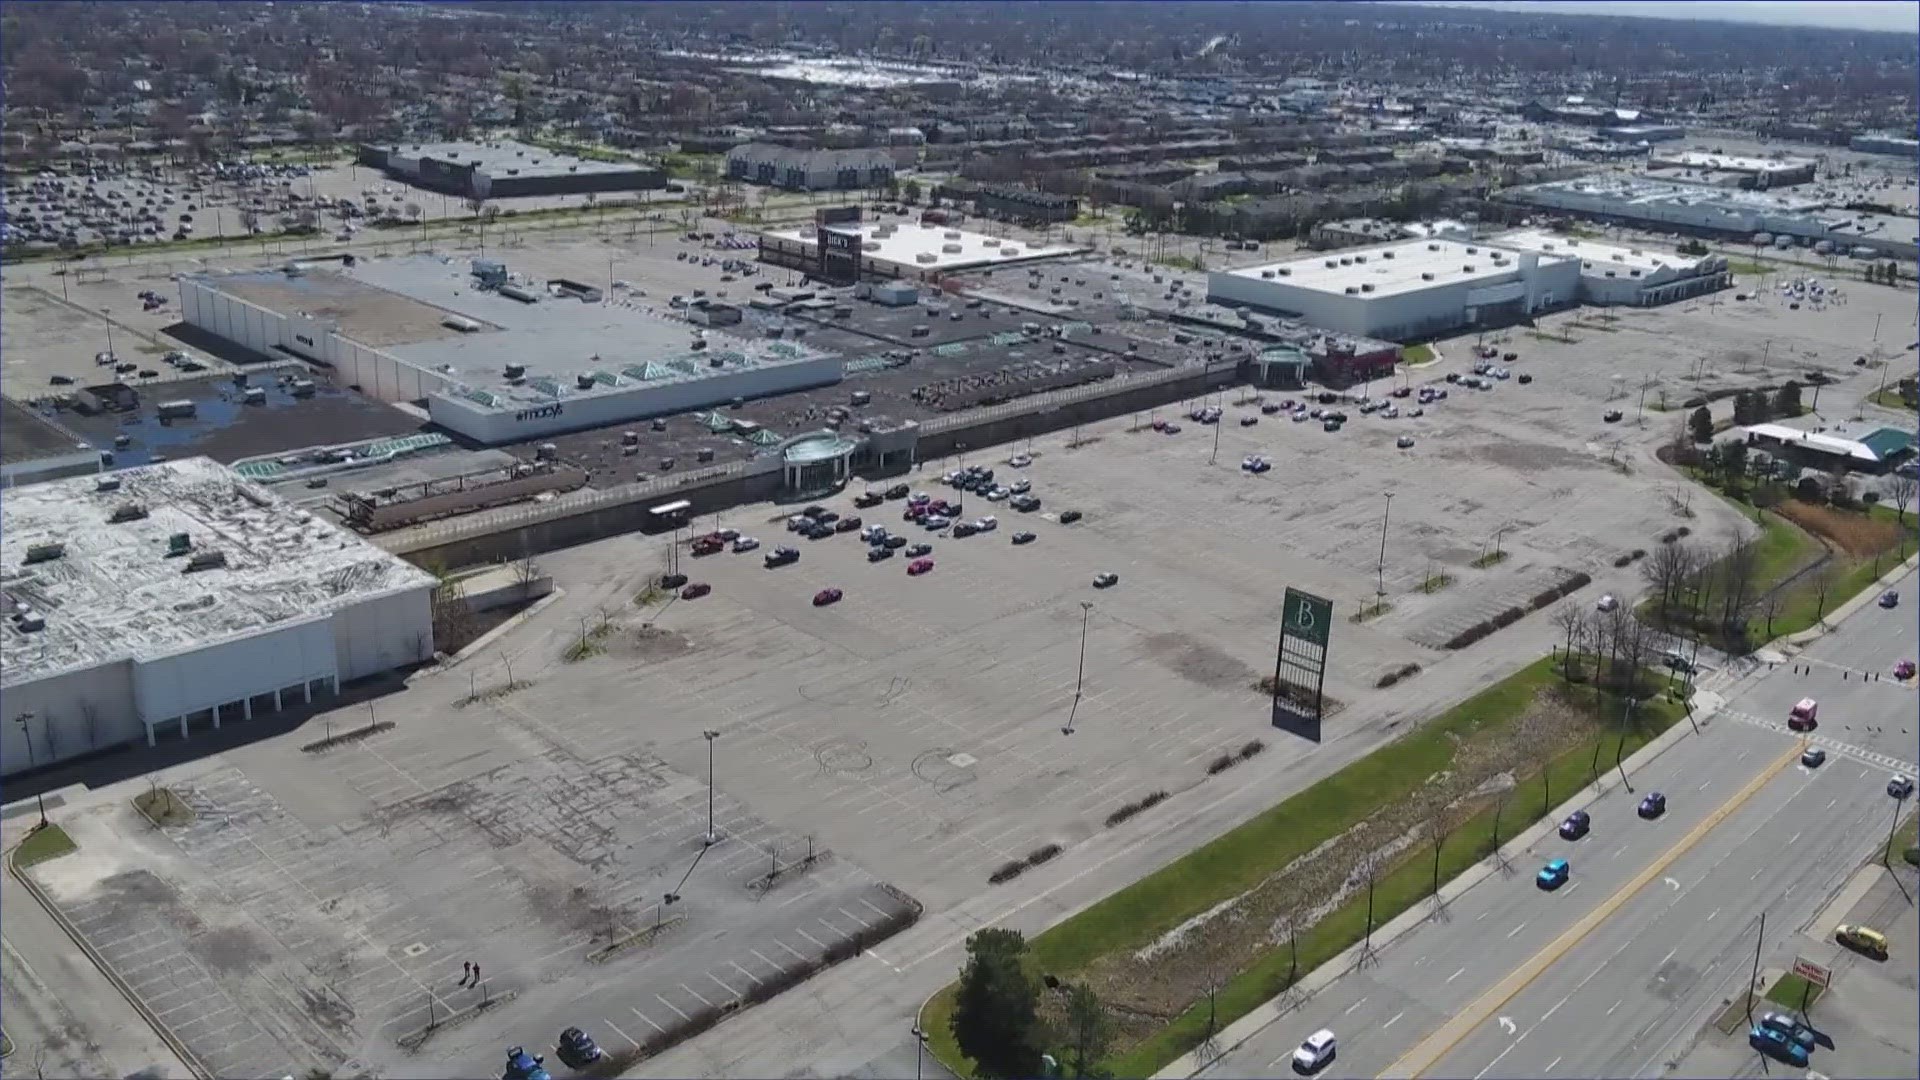 The town has been in the process of redeveloping the Boulevard Central District, which includes the Boulevard Mall site, for several years.